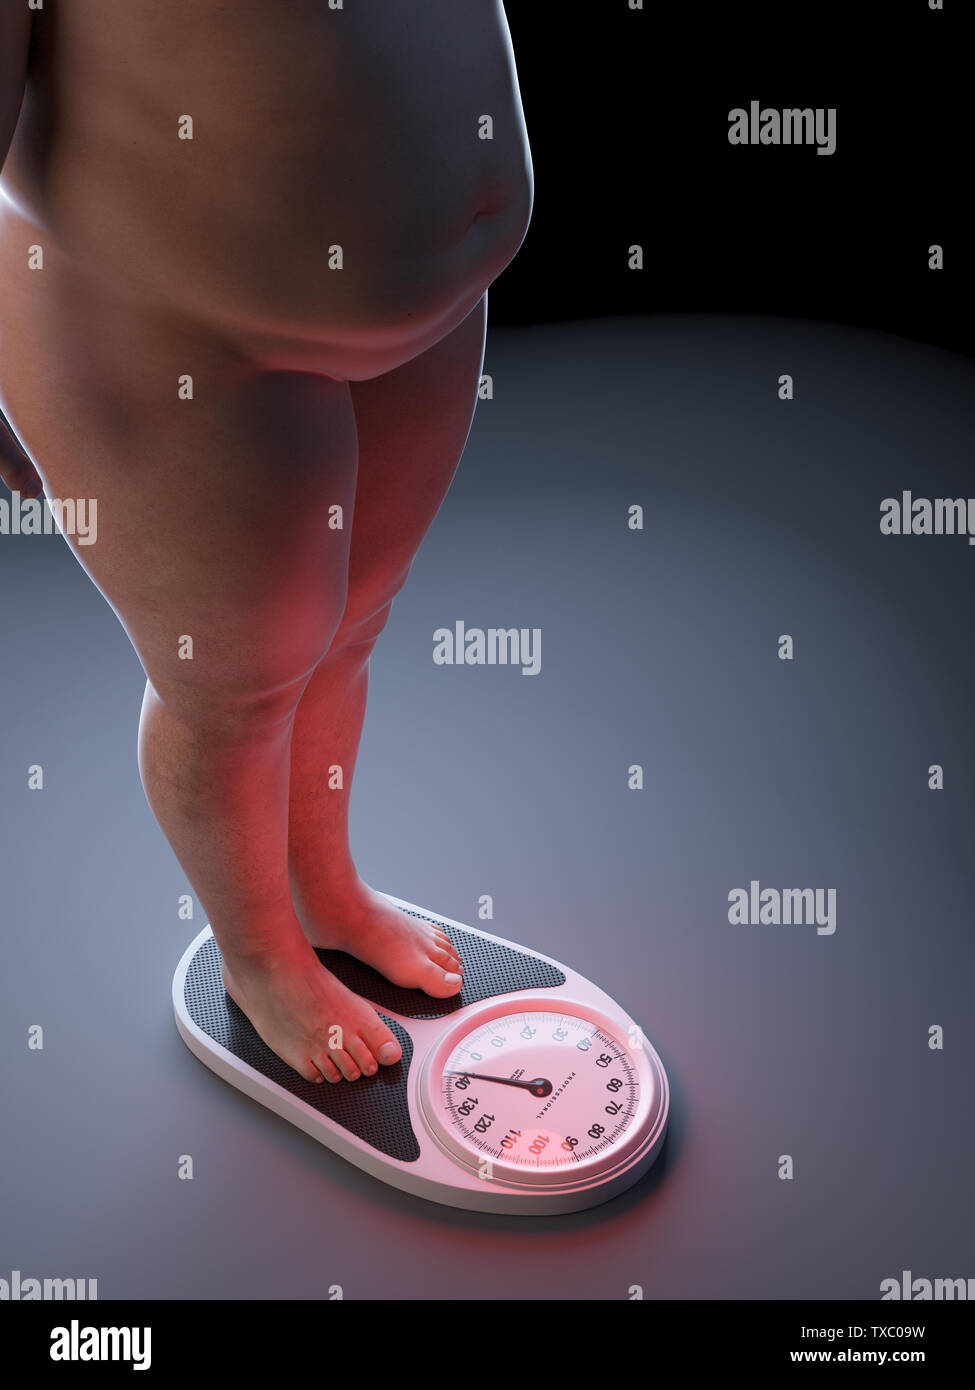 https://c8.alamy.com/comp/TXC09W/3d-rendered-medically-accurate-illustration-of-an-obese-man-on-a-scale-TXC09W.jpg